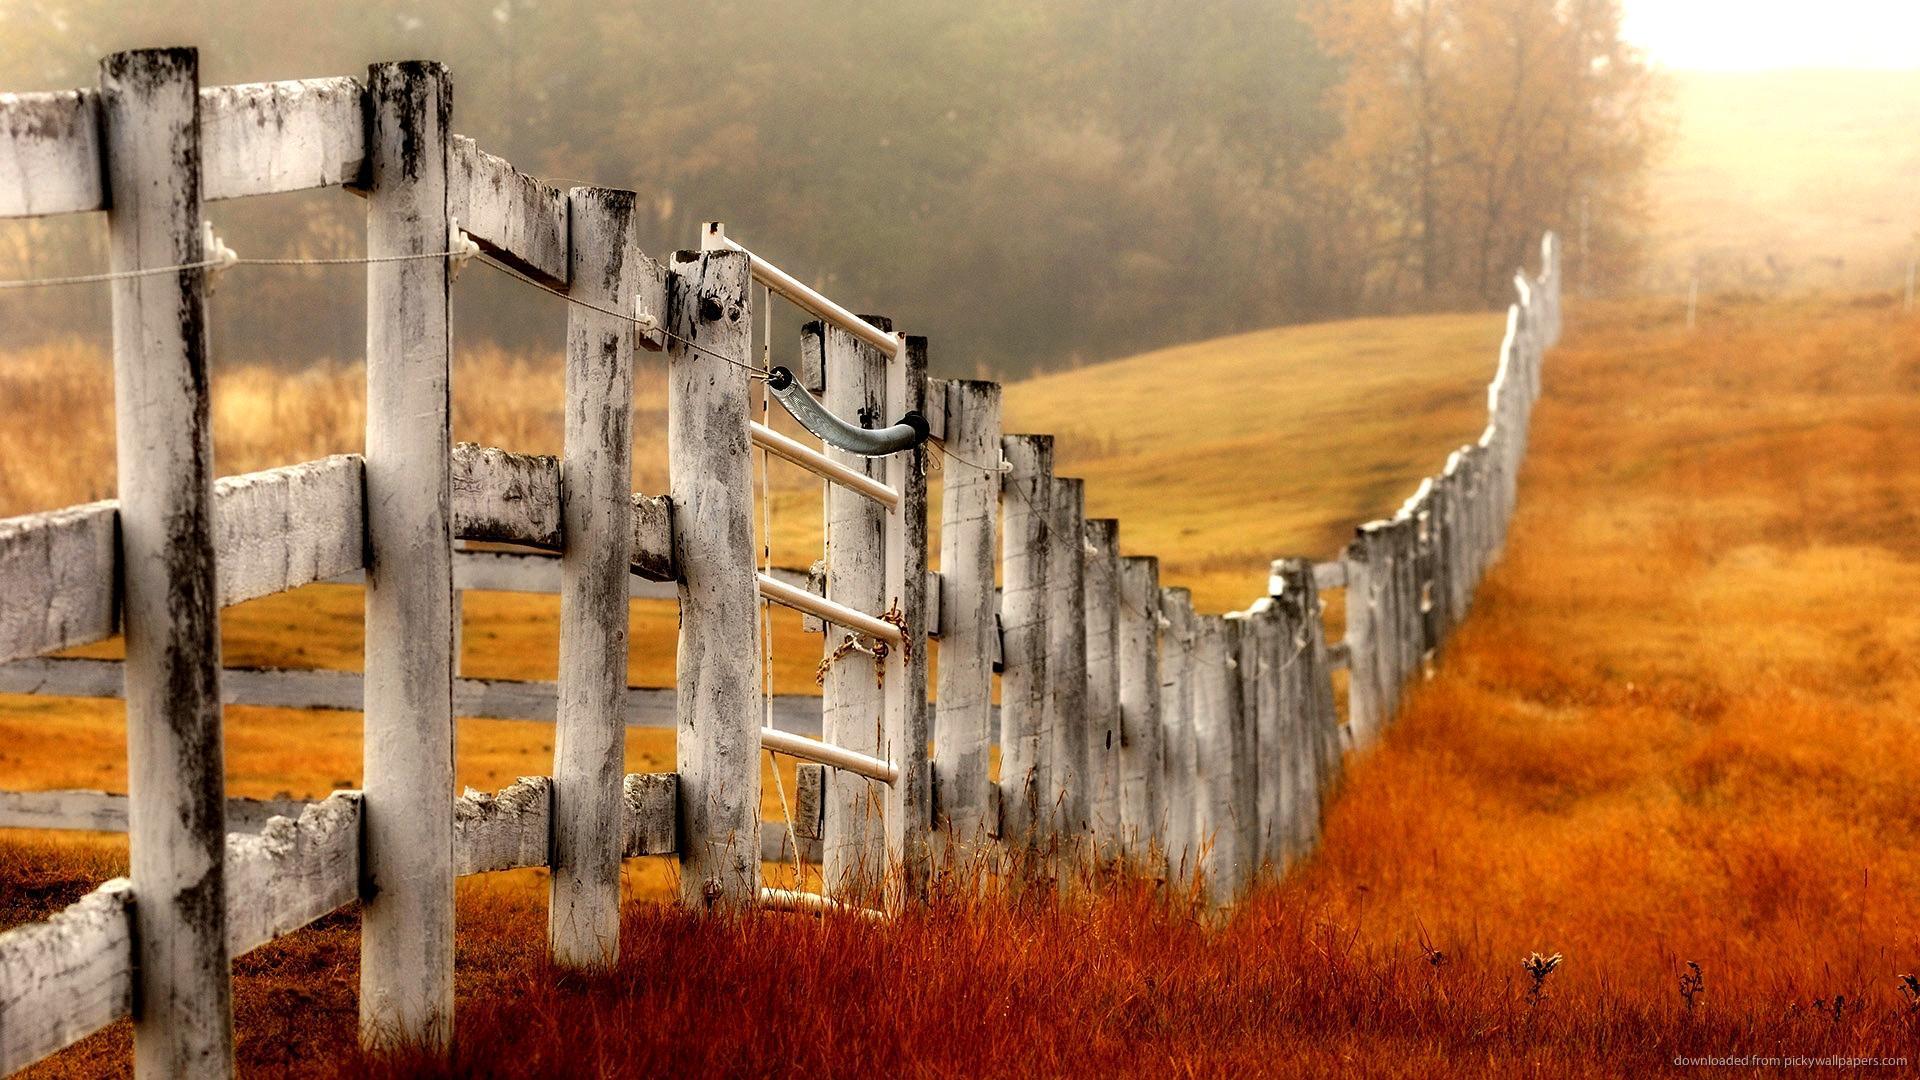 iPad Country Farm Fence Wallpaper Screensaver For Kindle3 And Dx